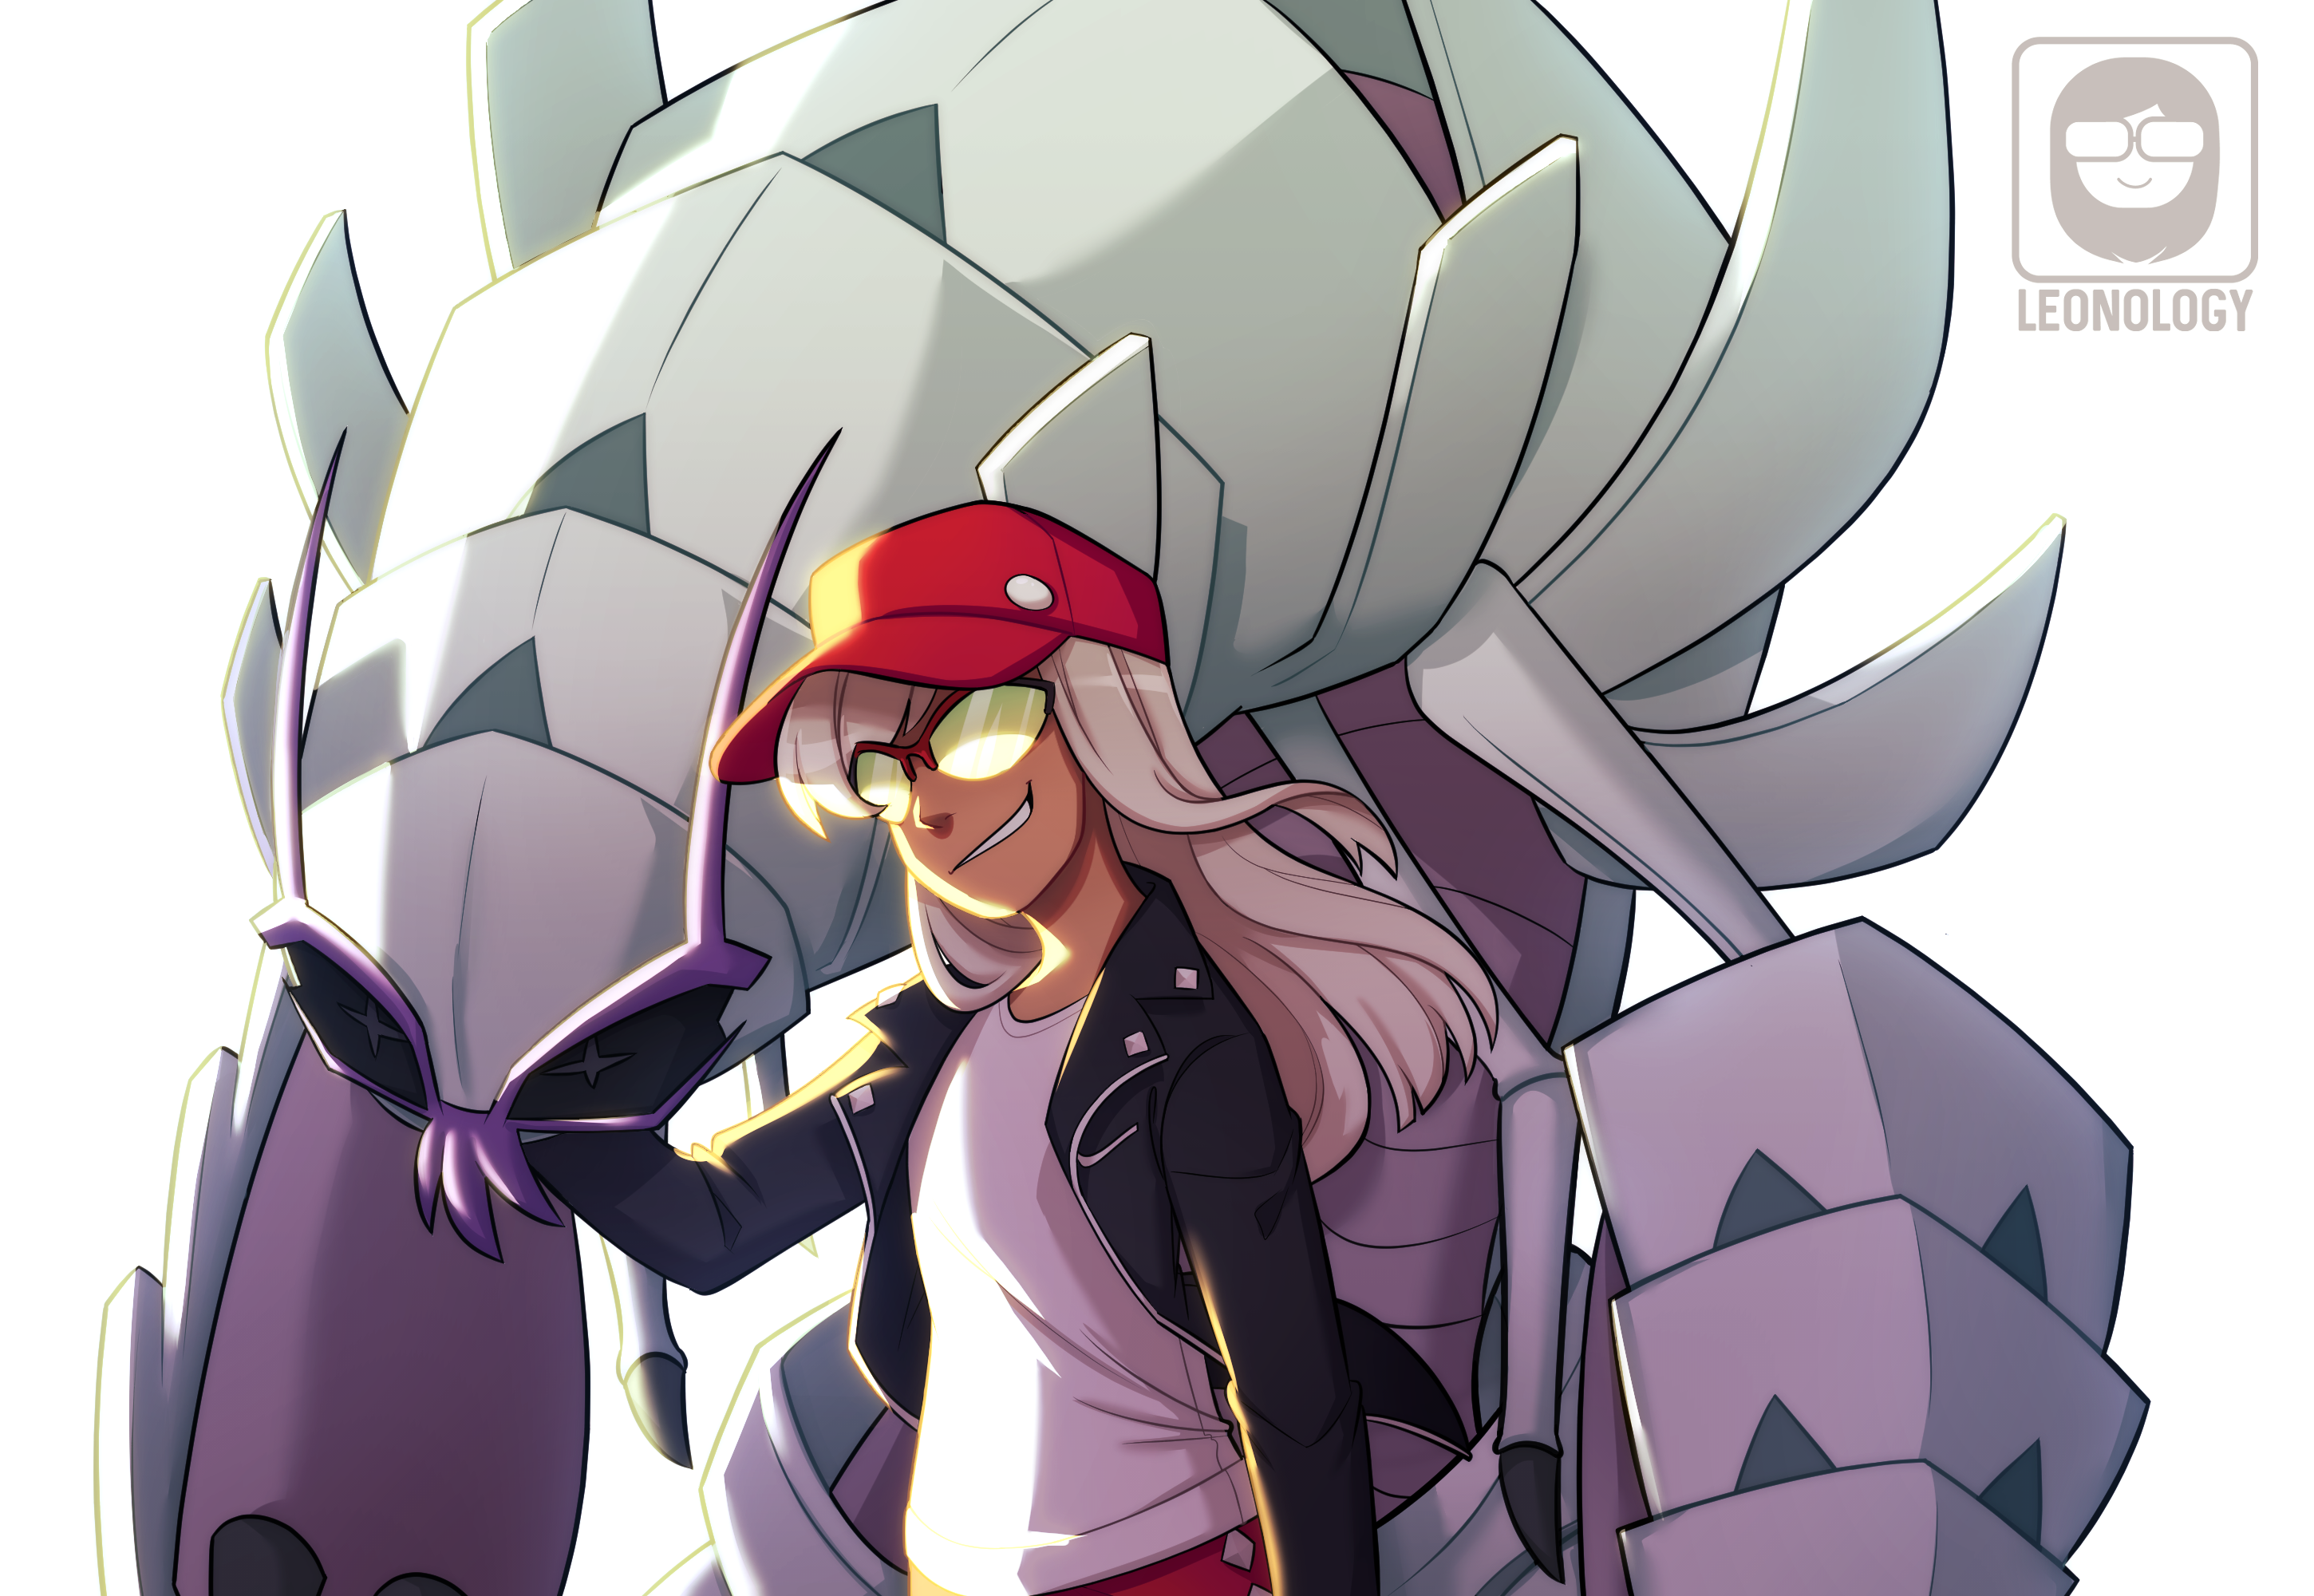 PARTY PARTY PARTY HARD — [Image: fanart of Dawn from Pokémon